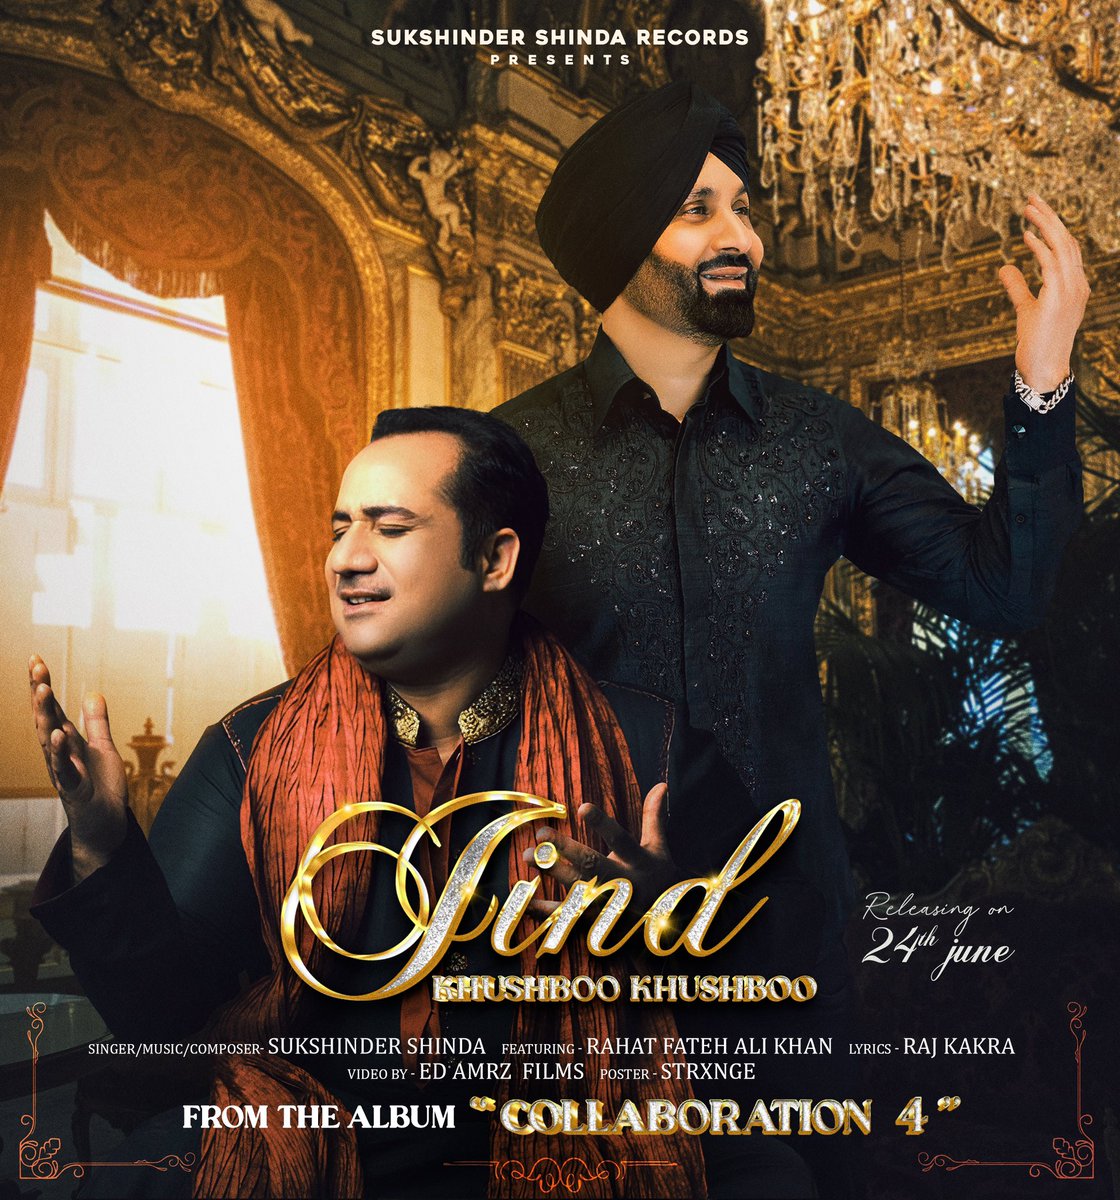 🎶 **New Music Alert**

🌟 The first song from the new album Collaborations 4 is coming your way!
Sukshinder Shinda and Rahat Fateh Ali Khan are back together, weaving magic with their new duet 'Jind Kushboo Khusboo' from the much-anticipated album Collaborations 4 - a reunion of